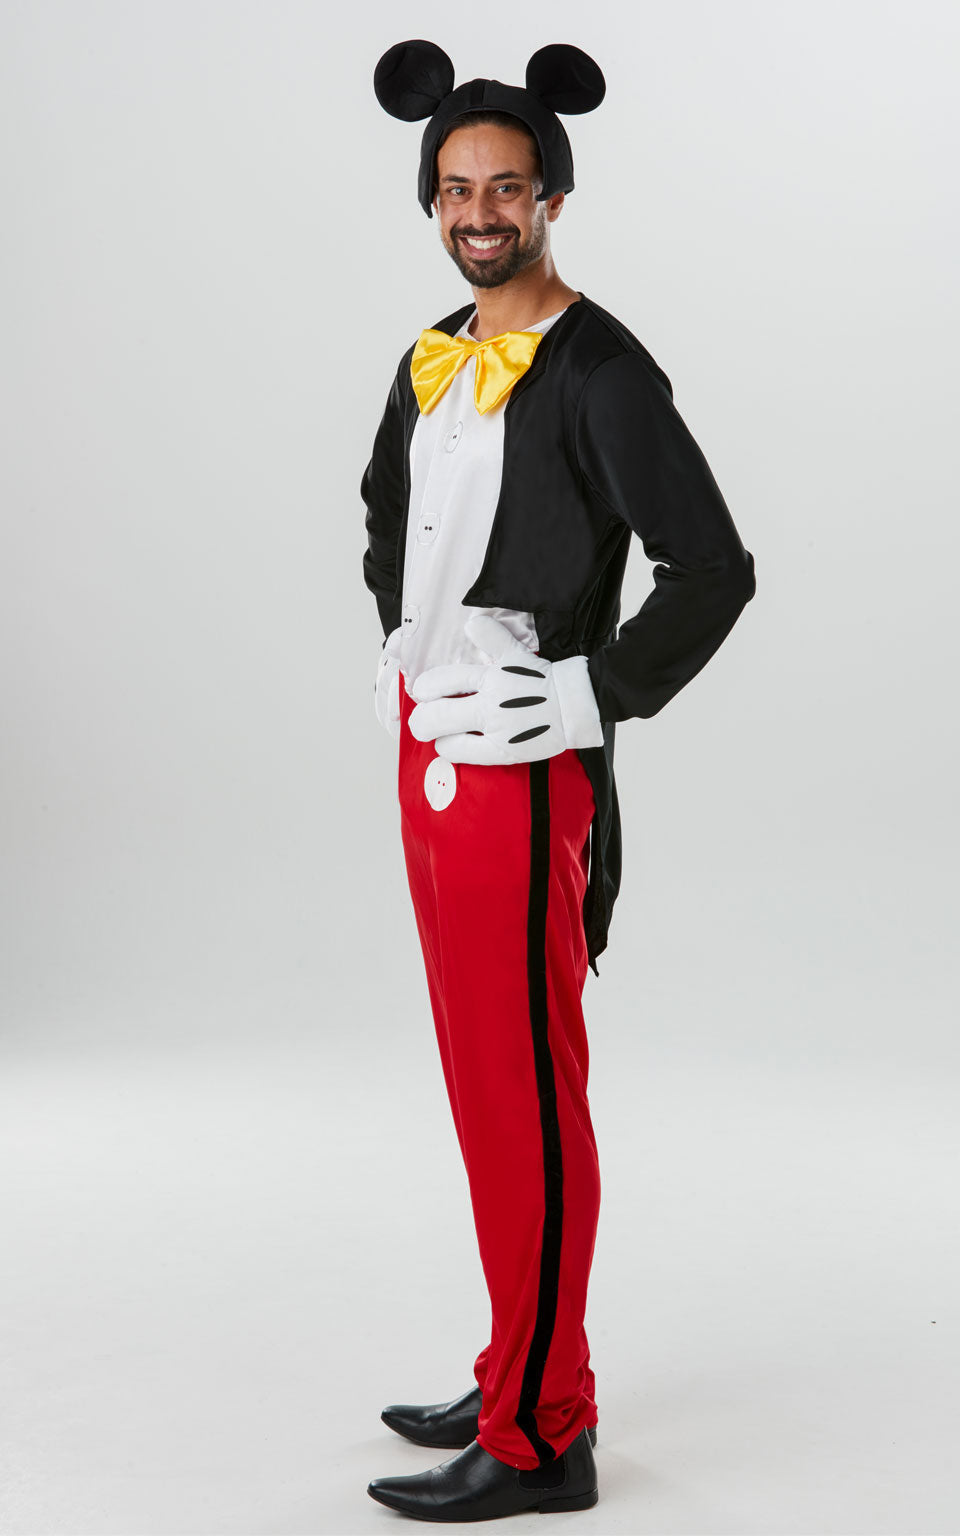 Disney Mickey Mouse Costume includes all in one jumpsuit with digitally printed buttons, black stripes down the legs, sewn in vest and attached mock jacket. Jumpsuit features attached satin bow tie. Velcro closures at rear. Oversized fibre filled gloves with printed details and four fibre filled fingers. Headpiece is a foam backed fabric snood with attached iconic Mickey Mouse ears. This is an officially licensed Disney product.